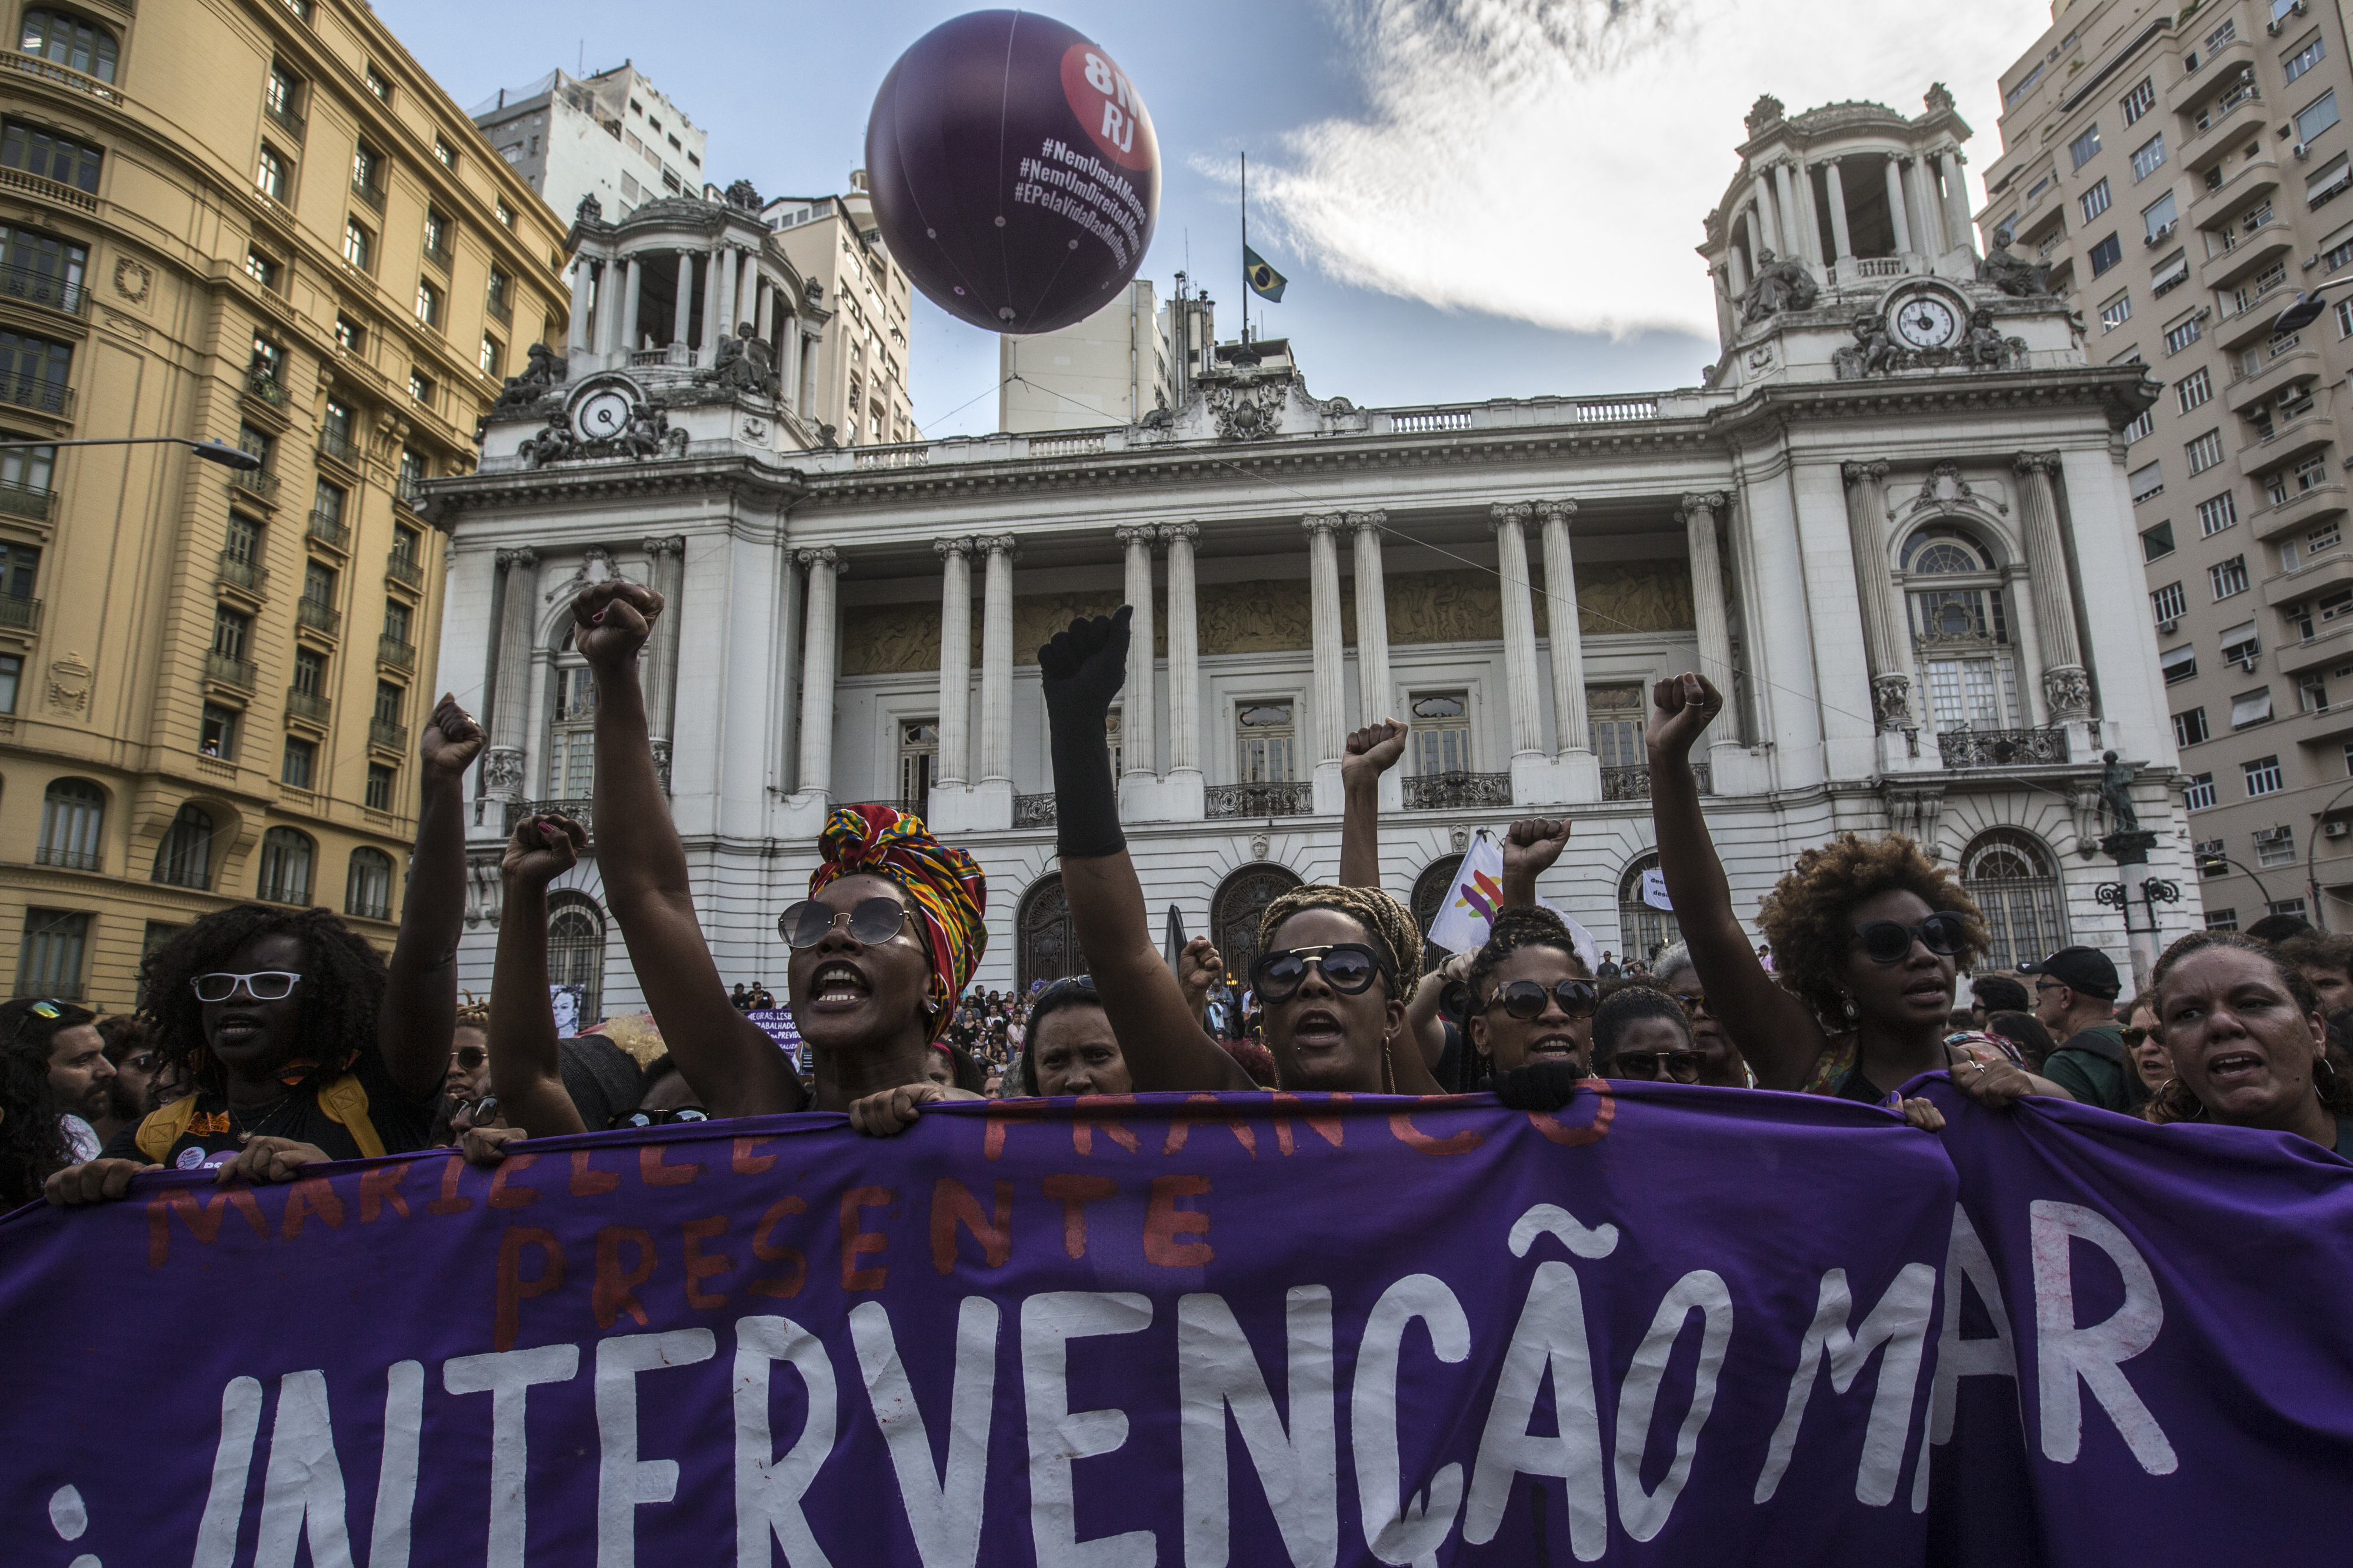 Supporters rally following the murder of councilwoman Marielle Franco in Rio de Janeiro, Brazil, on March 15, 2018. Franco, a 38 year-old black politician from one of Rio's poorest and most violent communities, killed late on March 14 in a shooting that many feared to be a targeted assassination. (Dado Galdieri—Bloomberg/Getty Images)